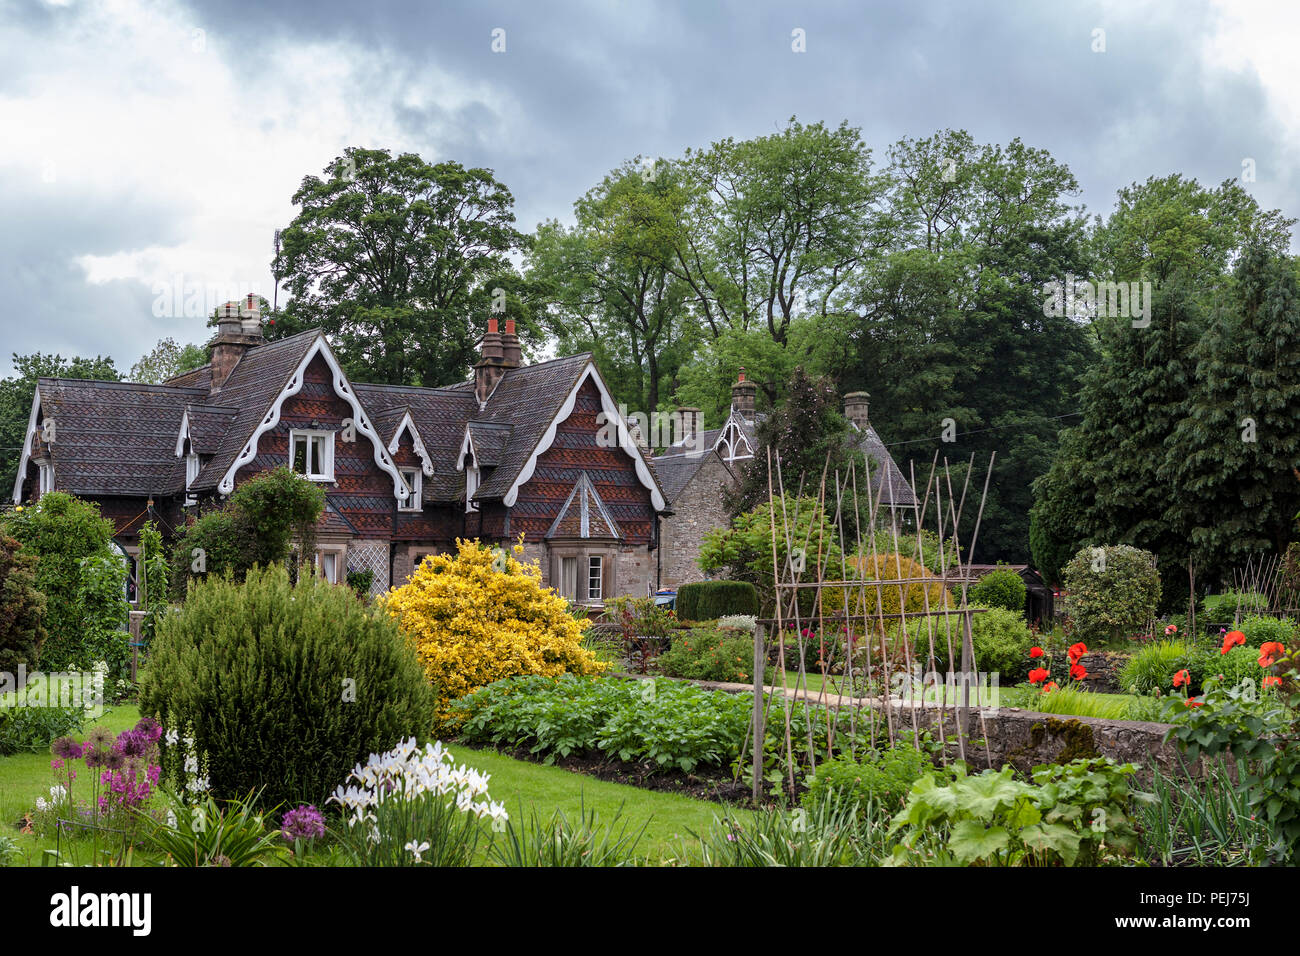 Cottages and gardens, Ilam, Staffordshire Stock Photo